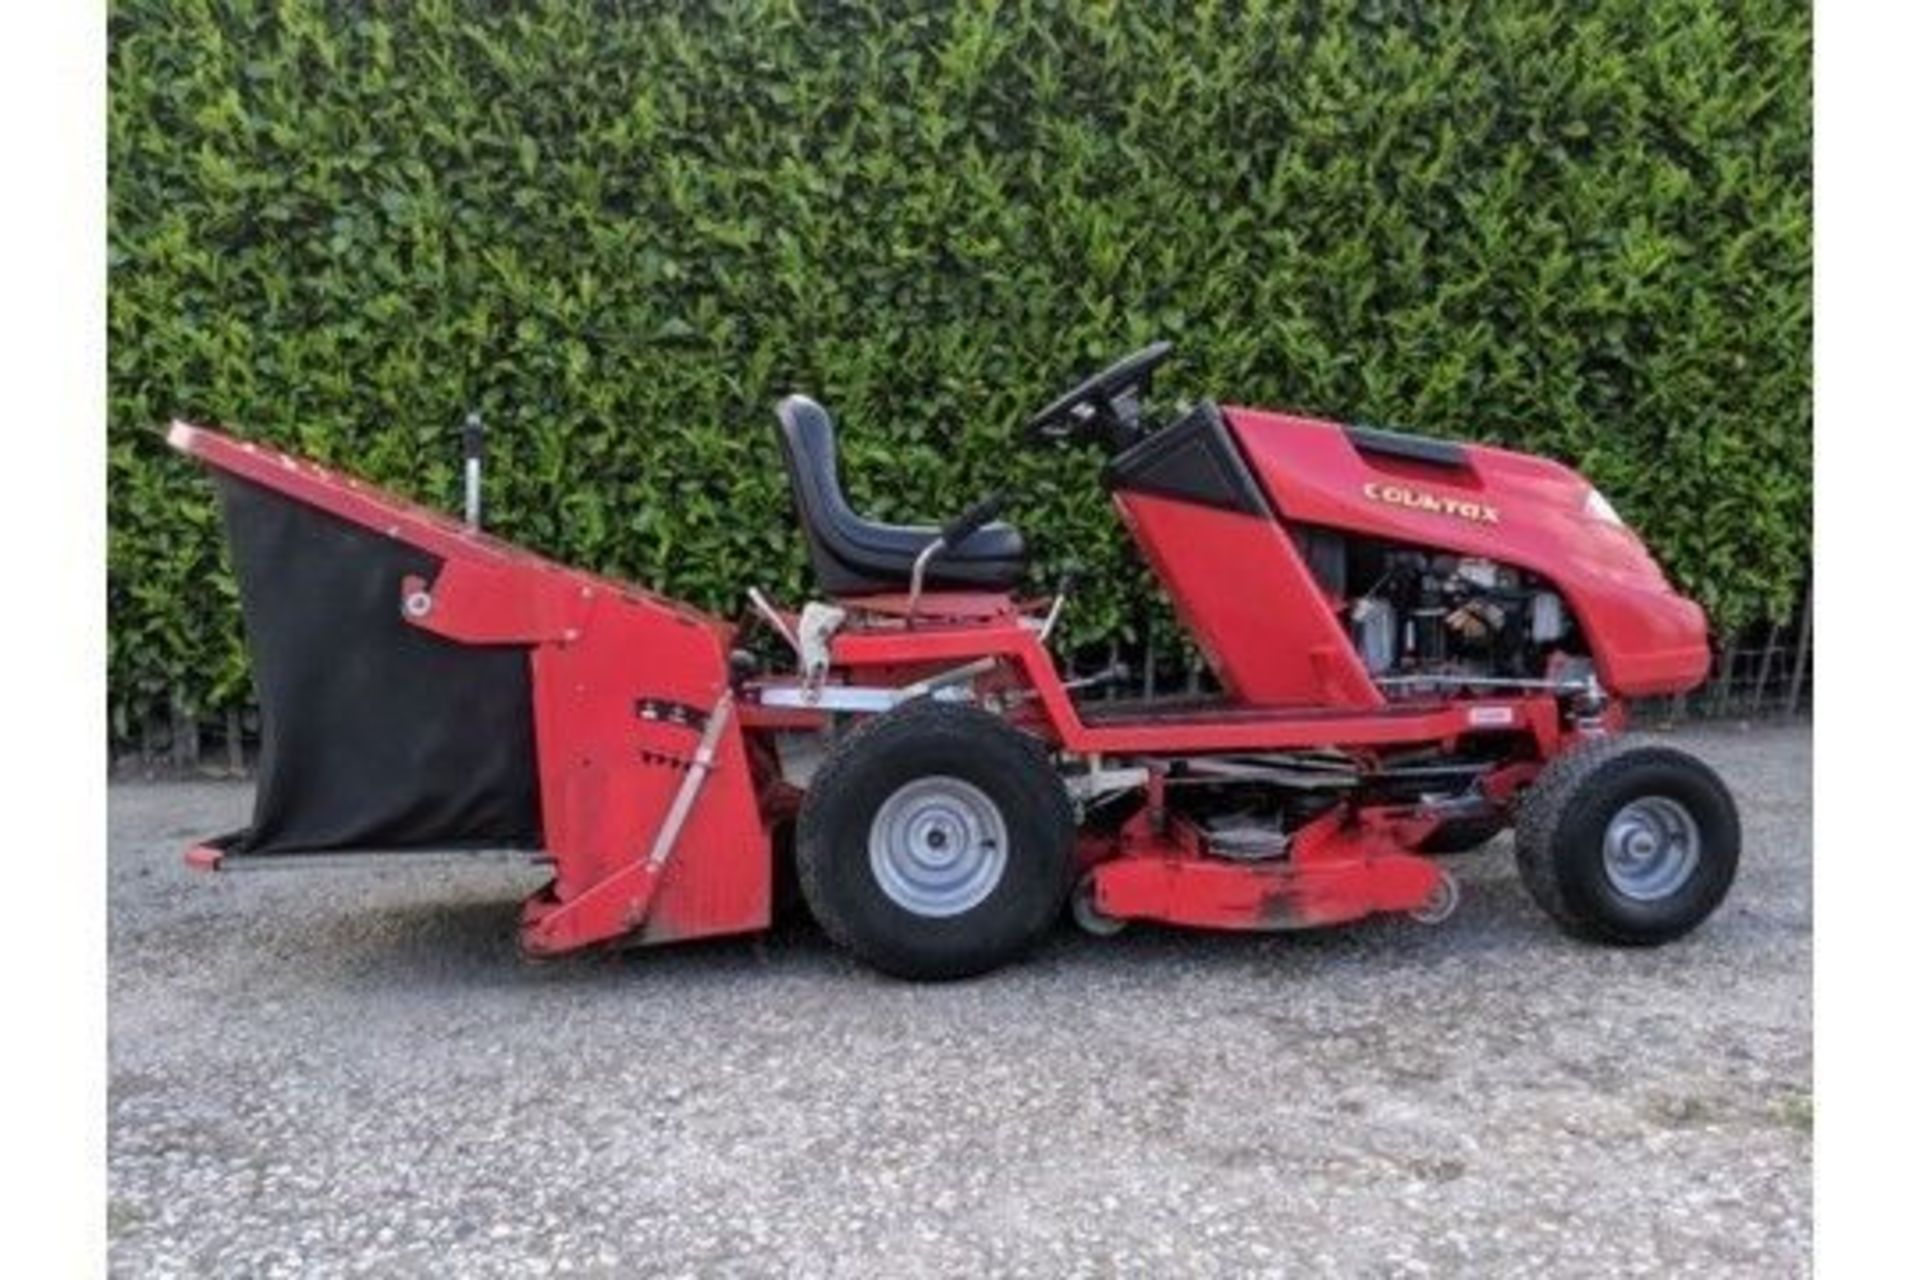 Countax C400H 38" Rear Discharge Garden Tractor With PGC